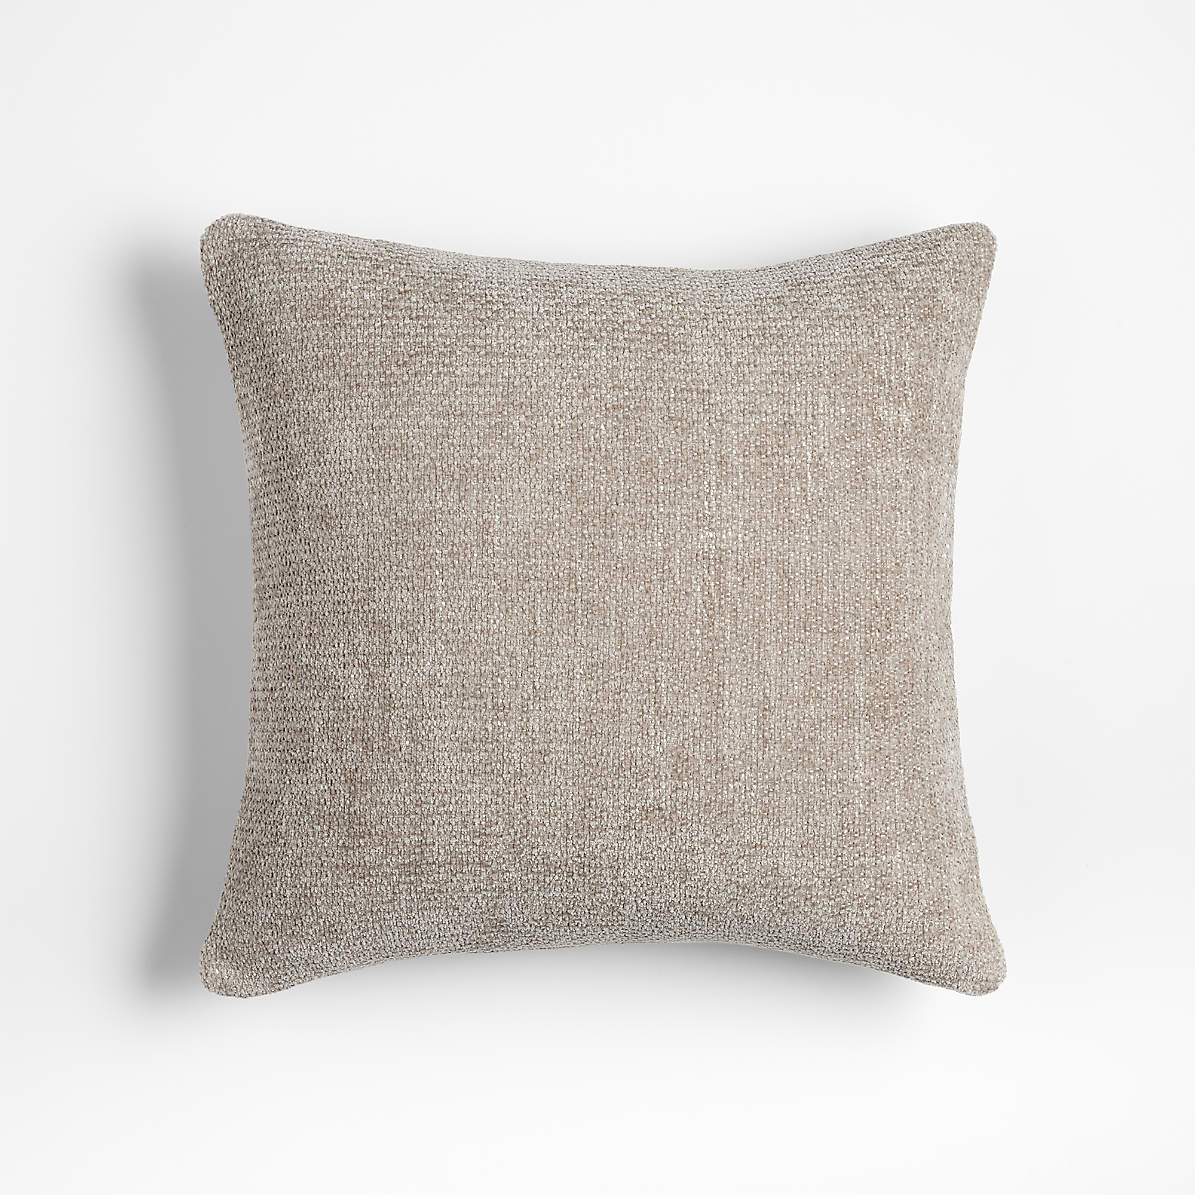 https://cb.scene7.com/is/image/Crate/MonarchChnll18inPlwNtTpSSF23/$web_pdp_main_carousel_zoom_med$/231011135707/monarch-chenille-18x18-natural-taupe-throw-pillow.jpg